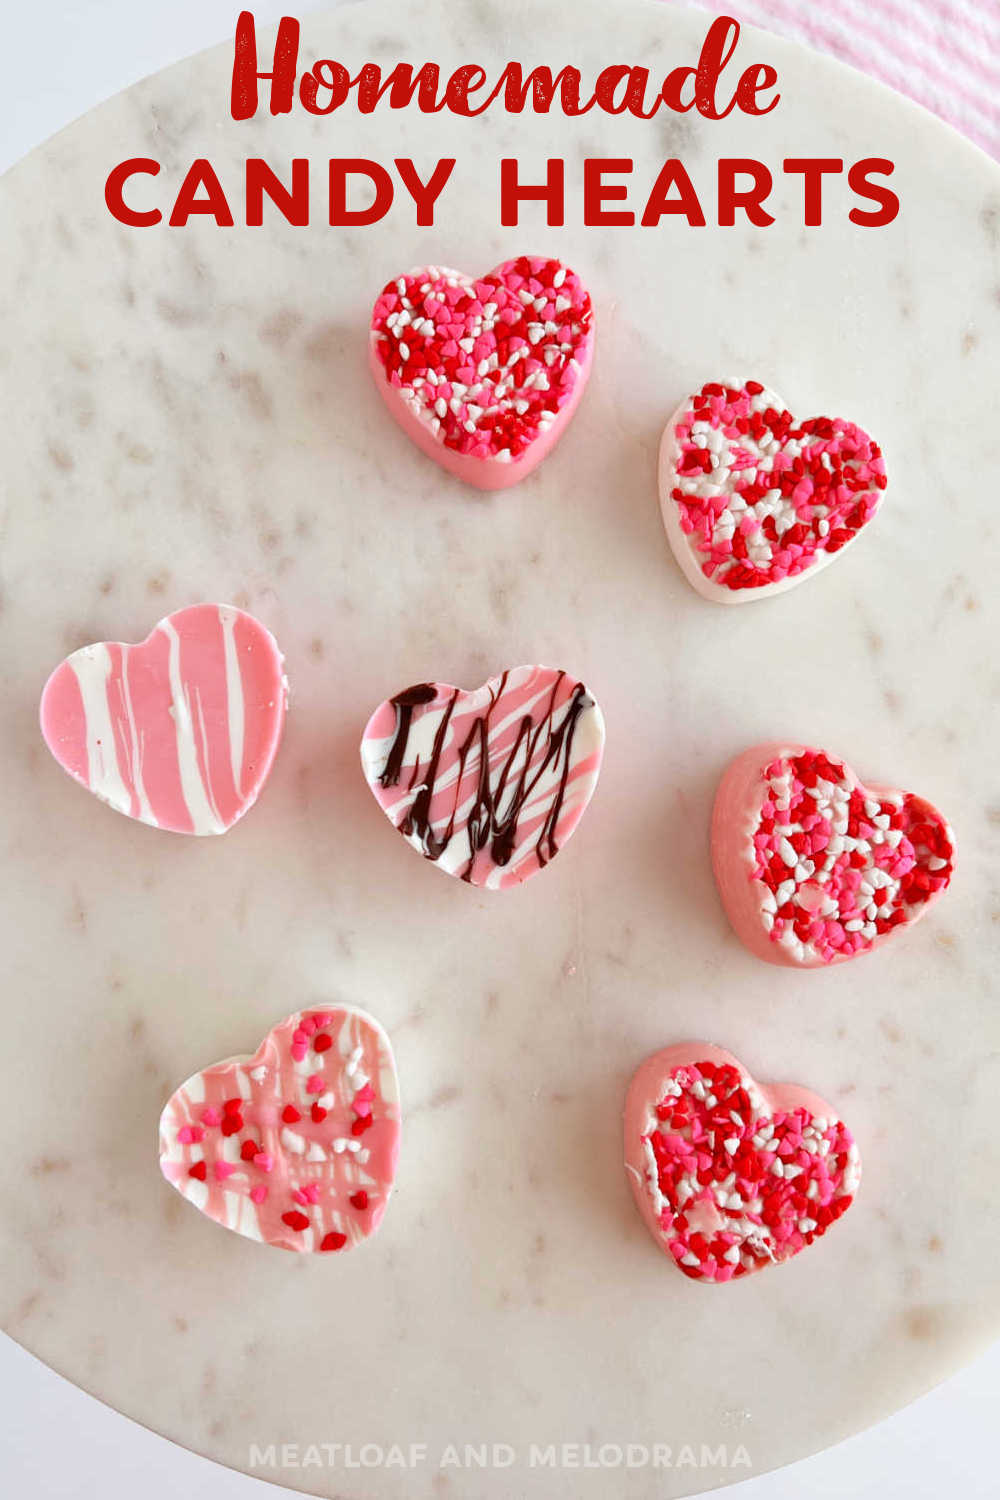 Homemade chocolate candy hearts made with candy melts and melted chocolate are perfect homemade treats for Valentine's Day. Share these little hearts with your sweetheart or add them to Valentine's Day treat bags! via @meamel